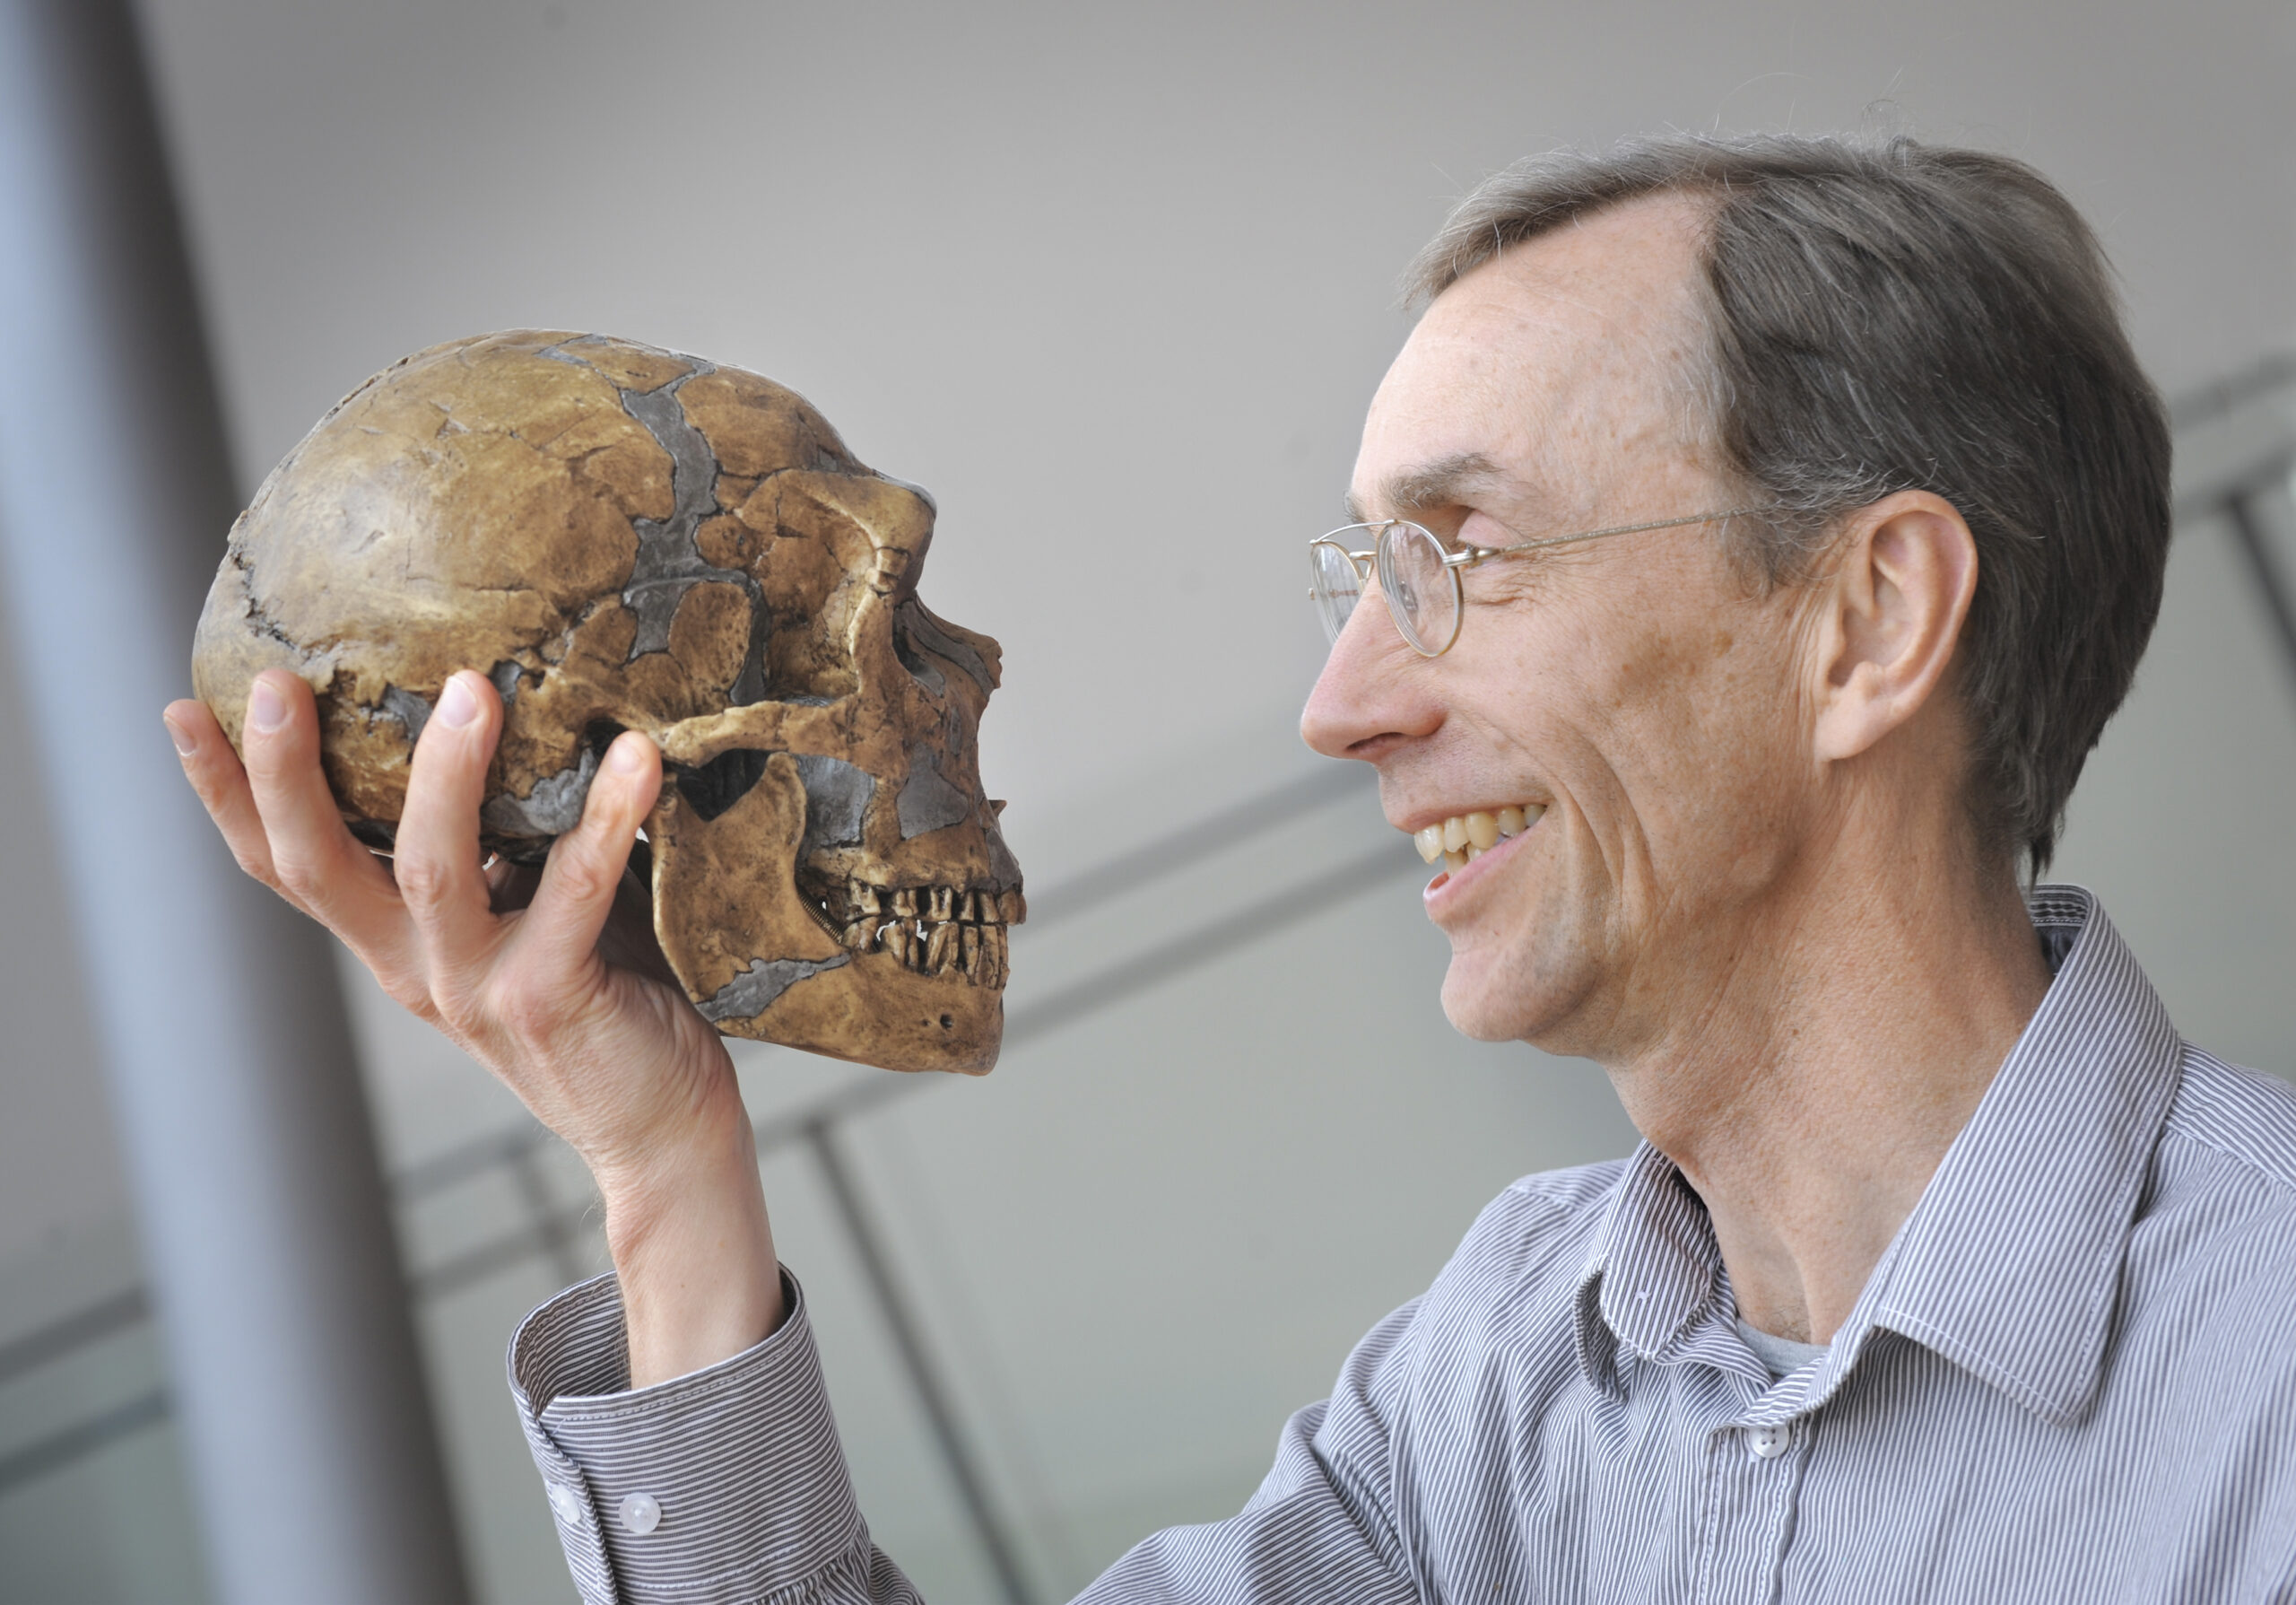 This photo provide by the Max-Planck-Gesellschaft shows Swedish scientist Svante Paabo in Leipzig, Germany, April 27, 2010. On Monday, Oct. 3, 2022 the Nobel Prize in physiology or medicine was awarded to Swedish scientist Svante Paabo for his discoveries on human evolution. (Frank Vinken for Max-Planck-Gesellschaft via AP)